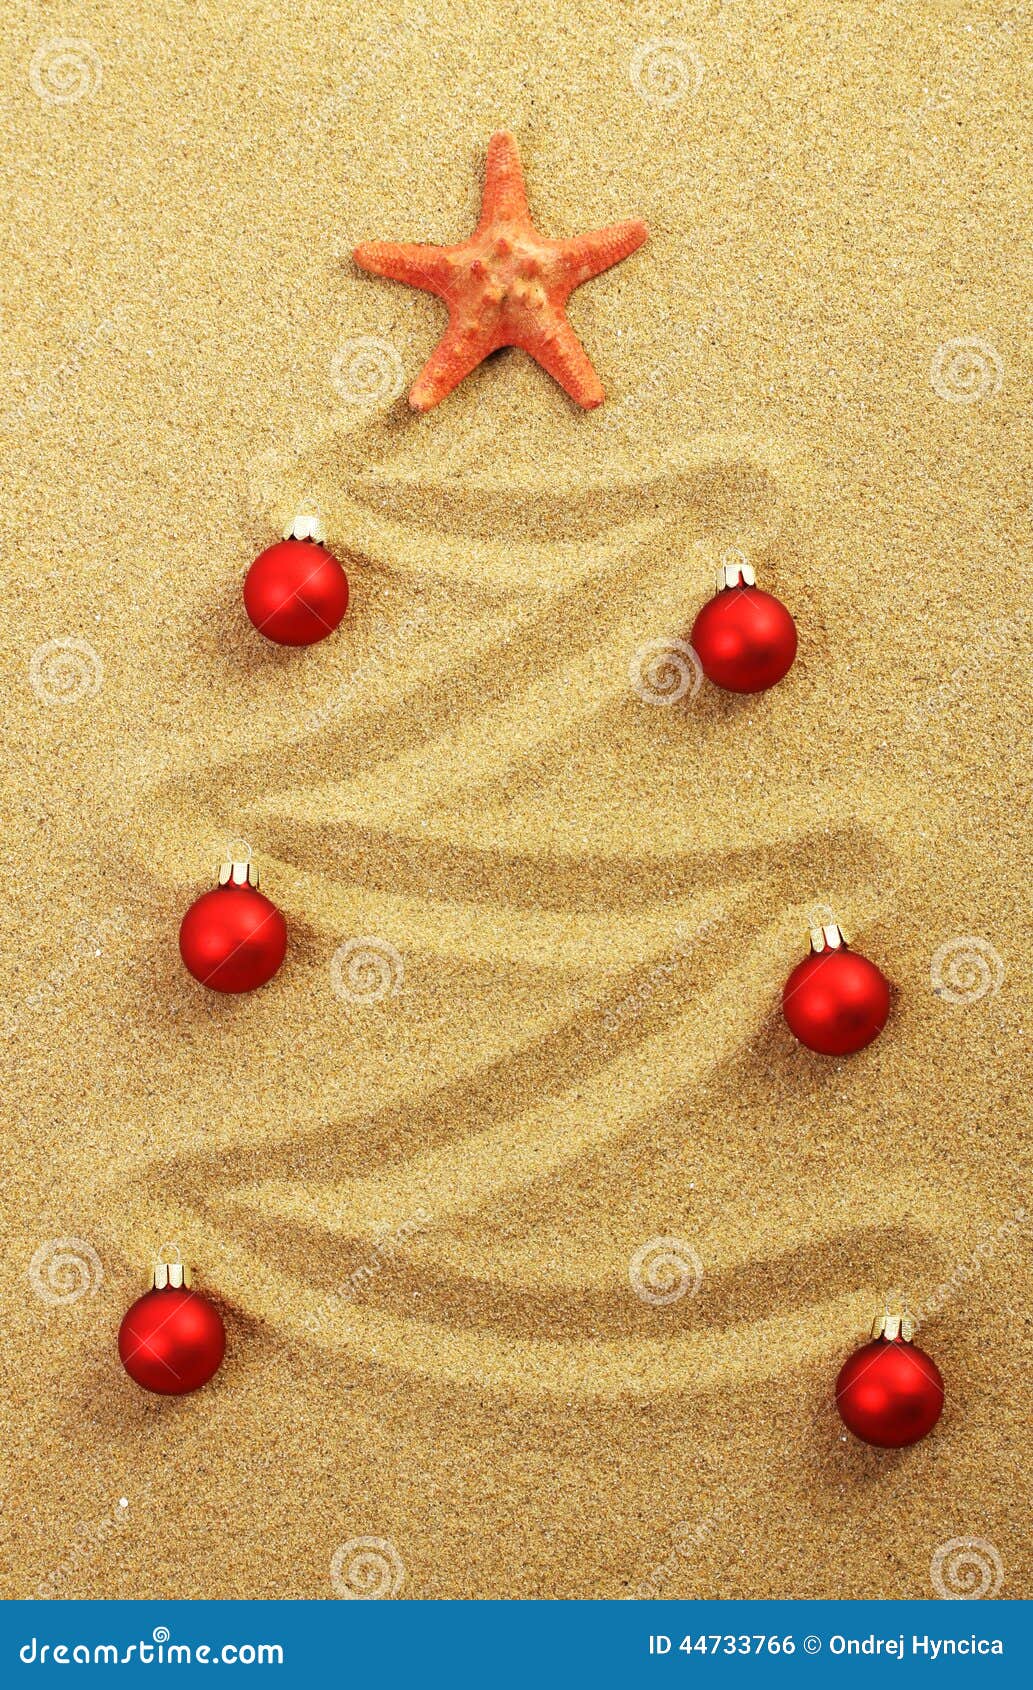 christmas tree on painting in sand with red starfish and red matt christmas balls